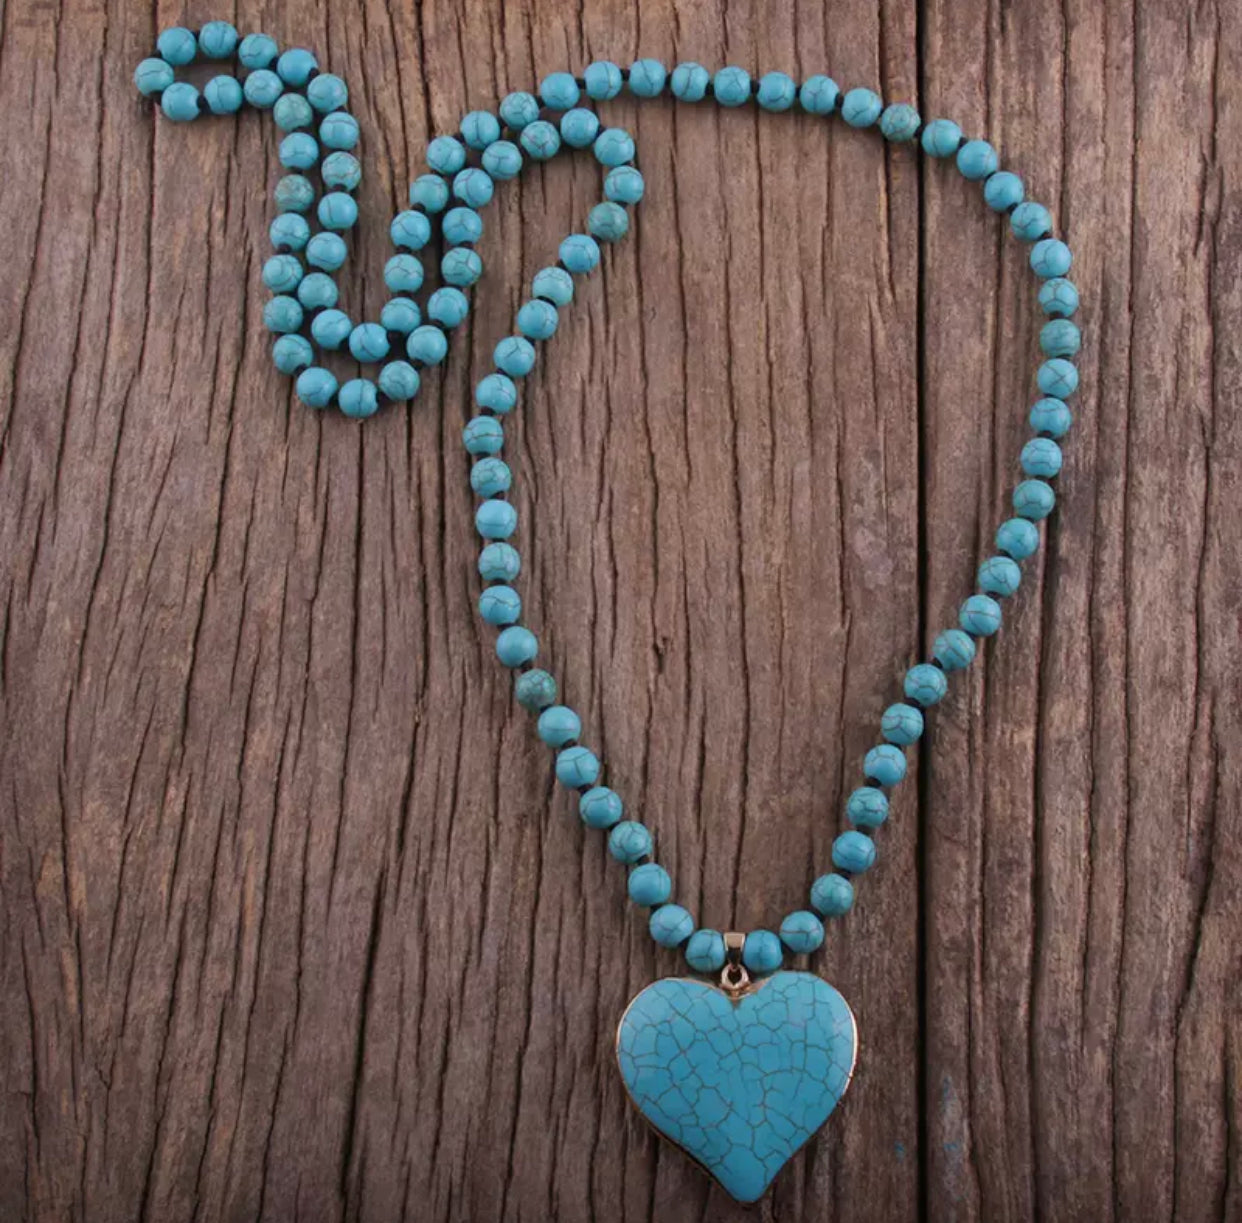 beads with genuine turquoise stone heart pendant necklace